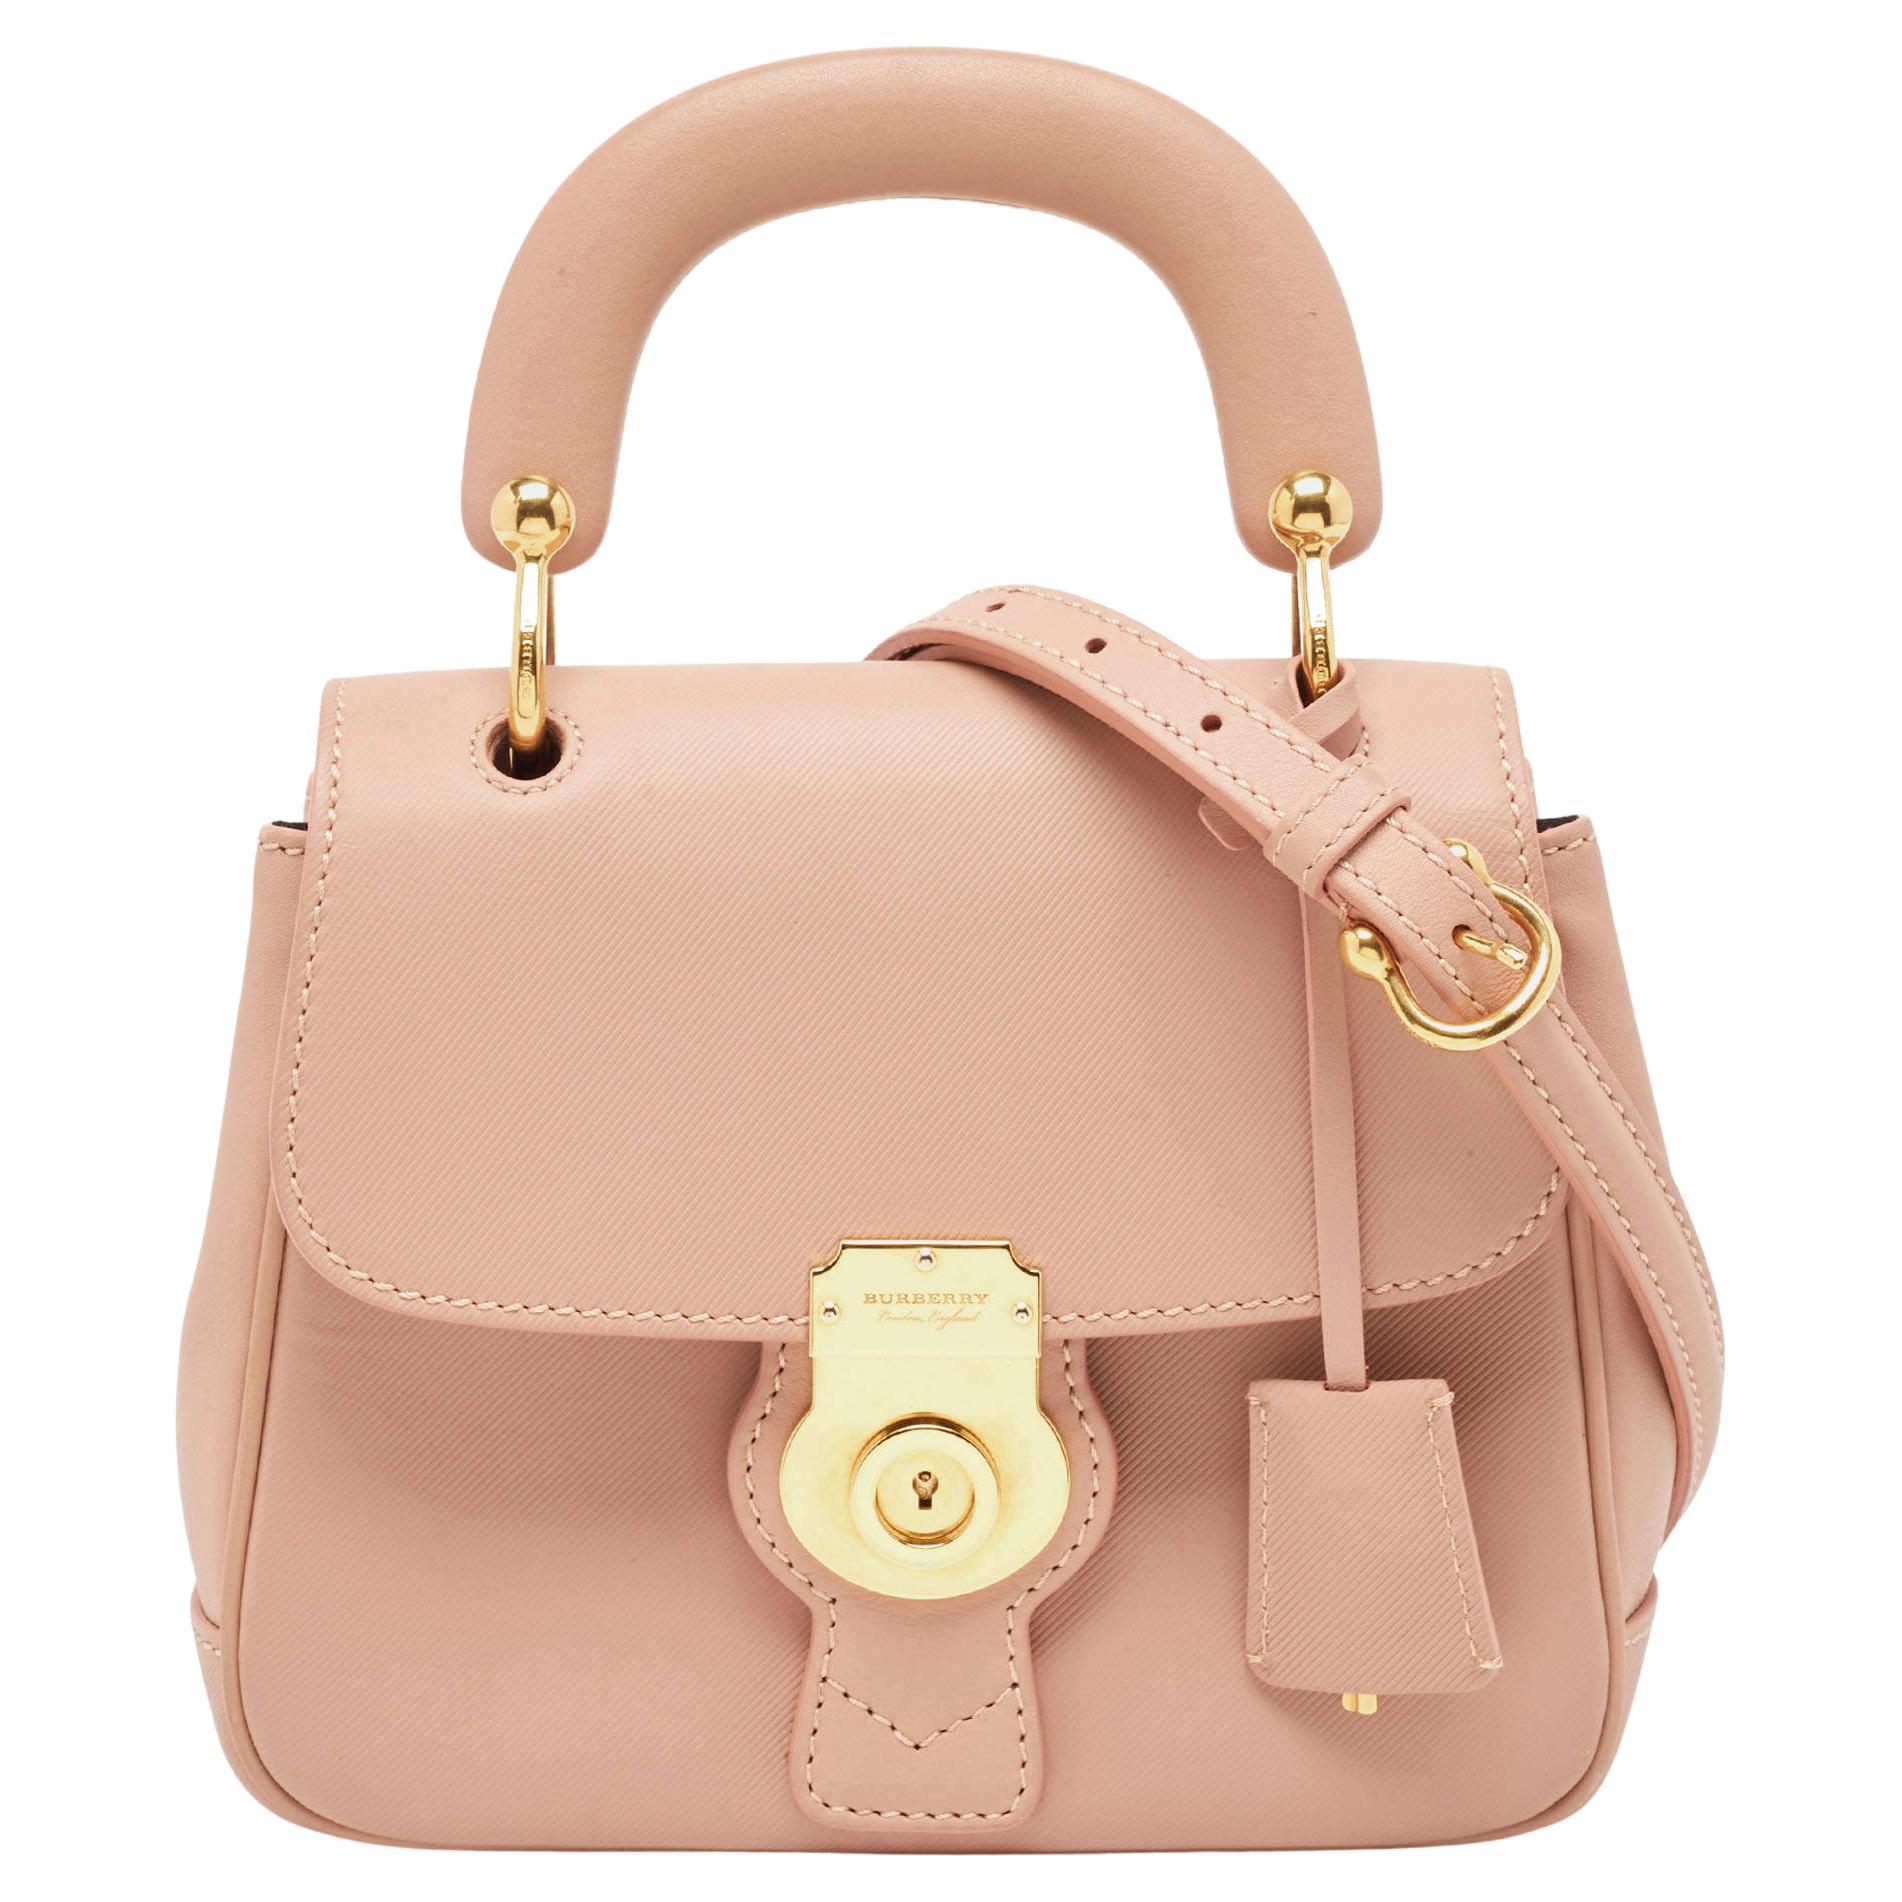 Burberry Old Rose Leather Small DK88 Top Handle Bag